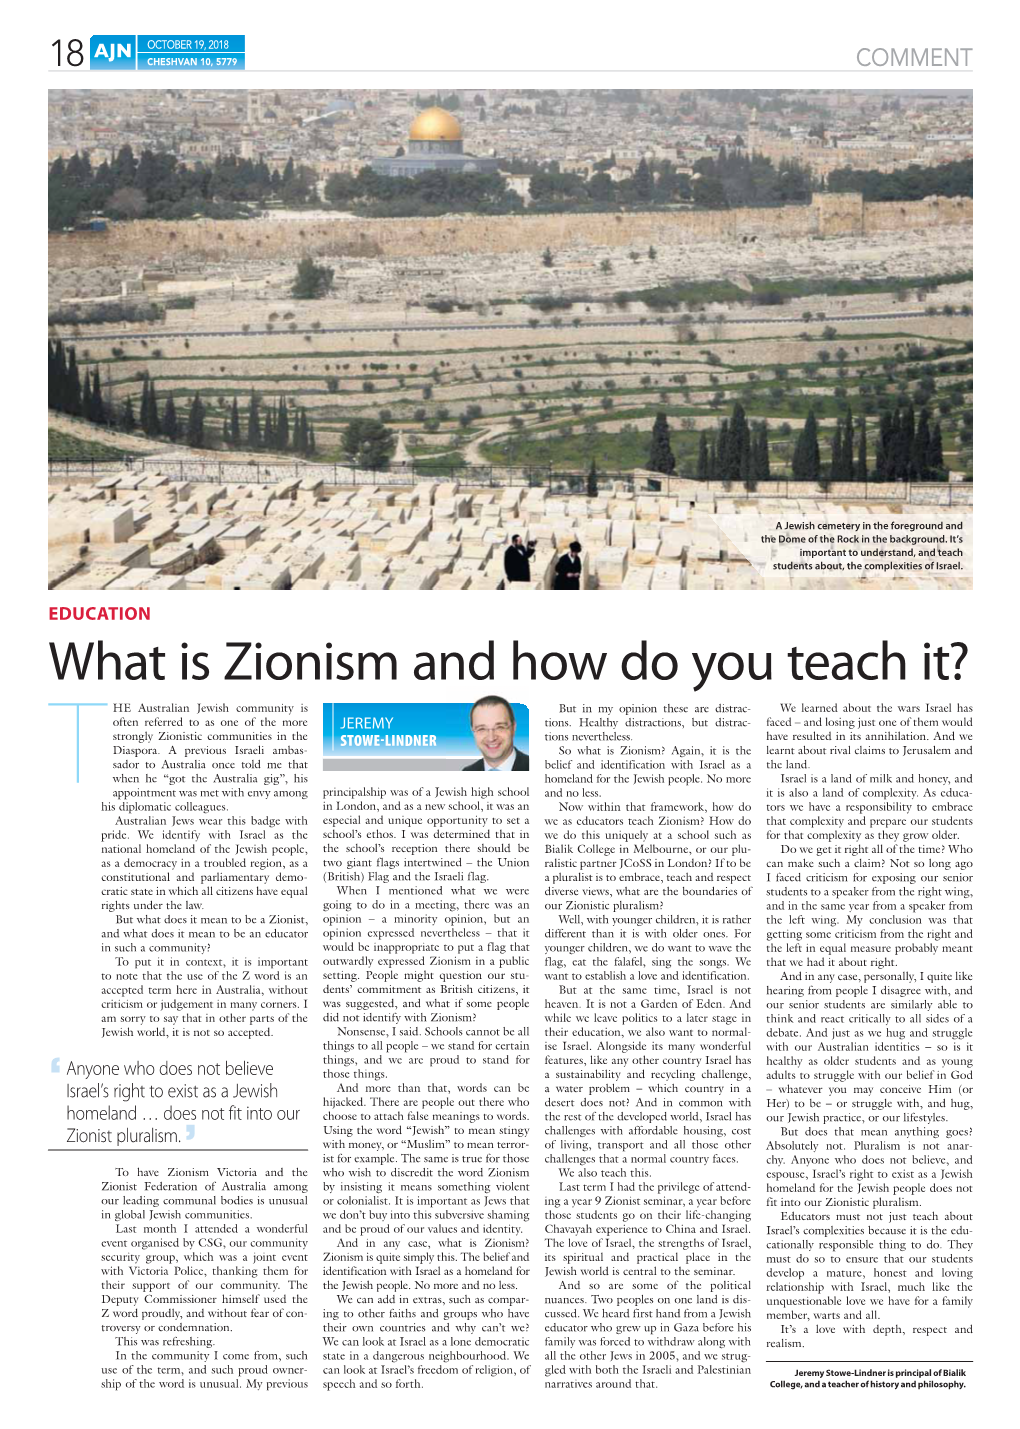 What Is Zionism and How Do You Teach It?